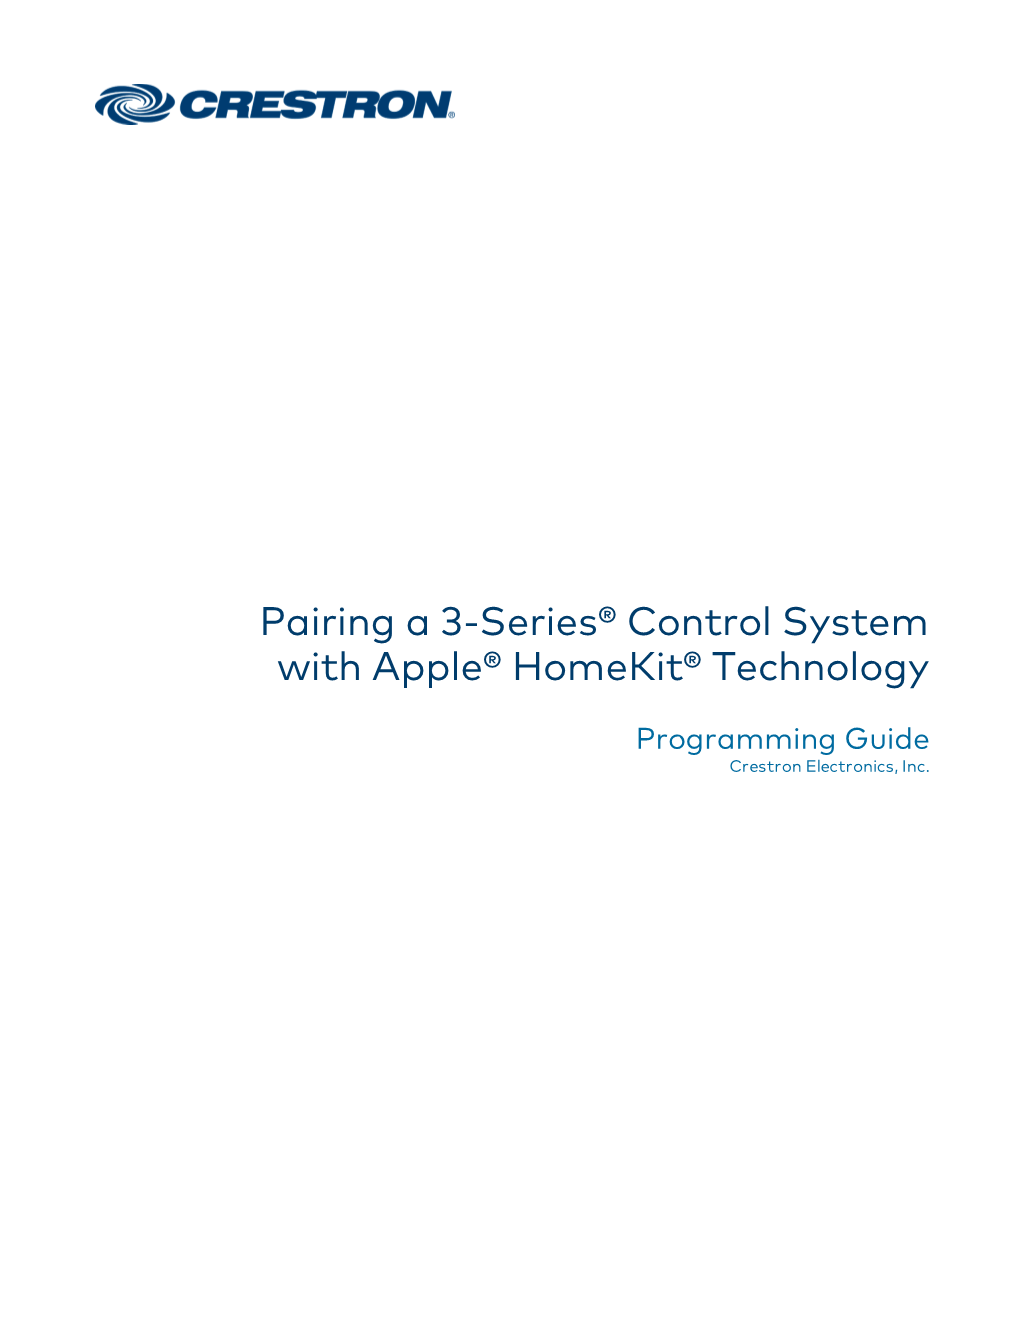 Pairing a 3-Series® Control System with Apple® Homekit® Technology